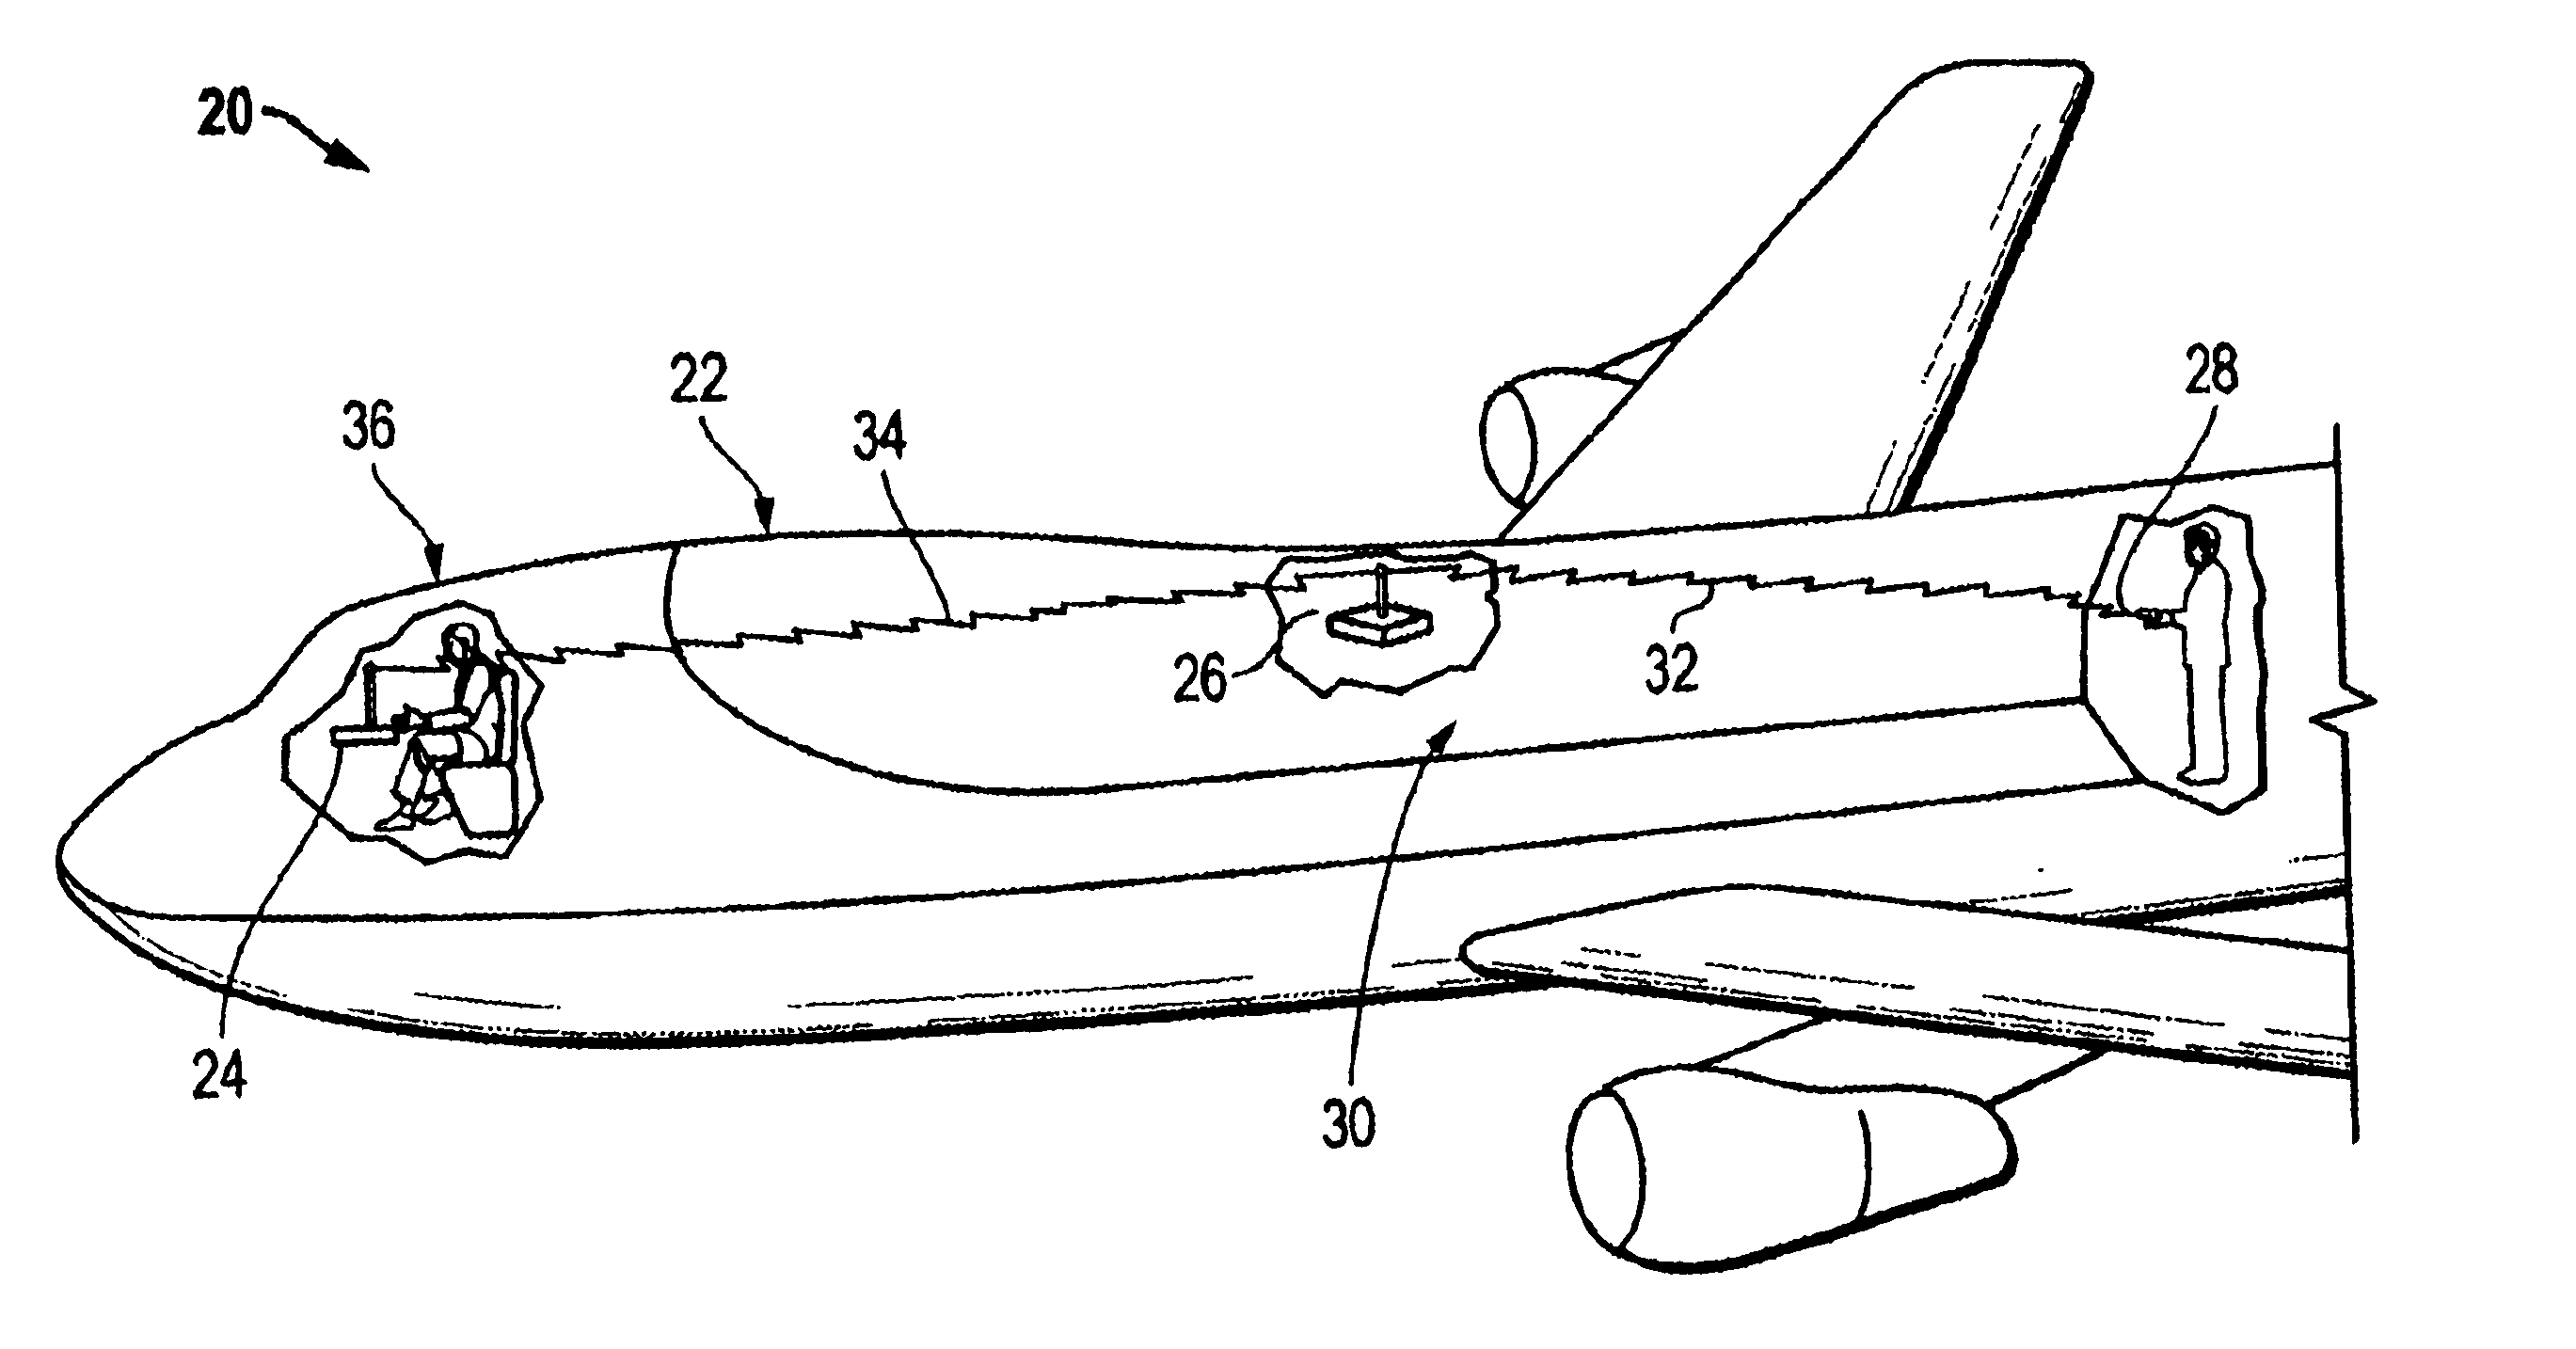 System and method for alerting a cockpit crew of terrorist activity